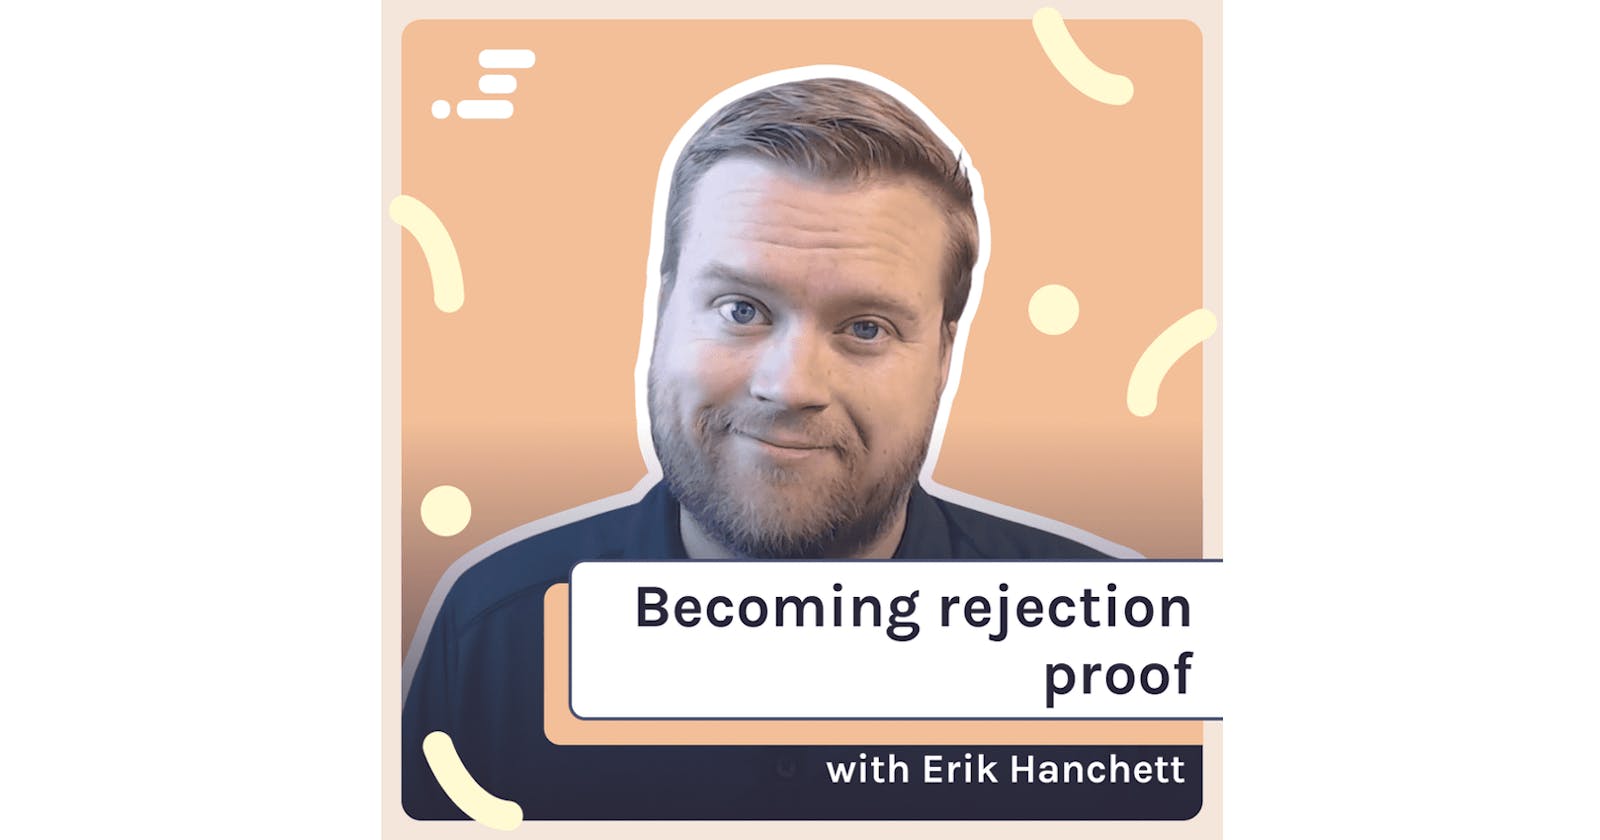 Erik Hanchett: Advice on how to get your first developer job from an Amazon Front-End Engineer